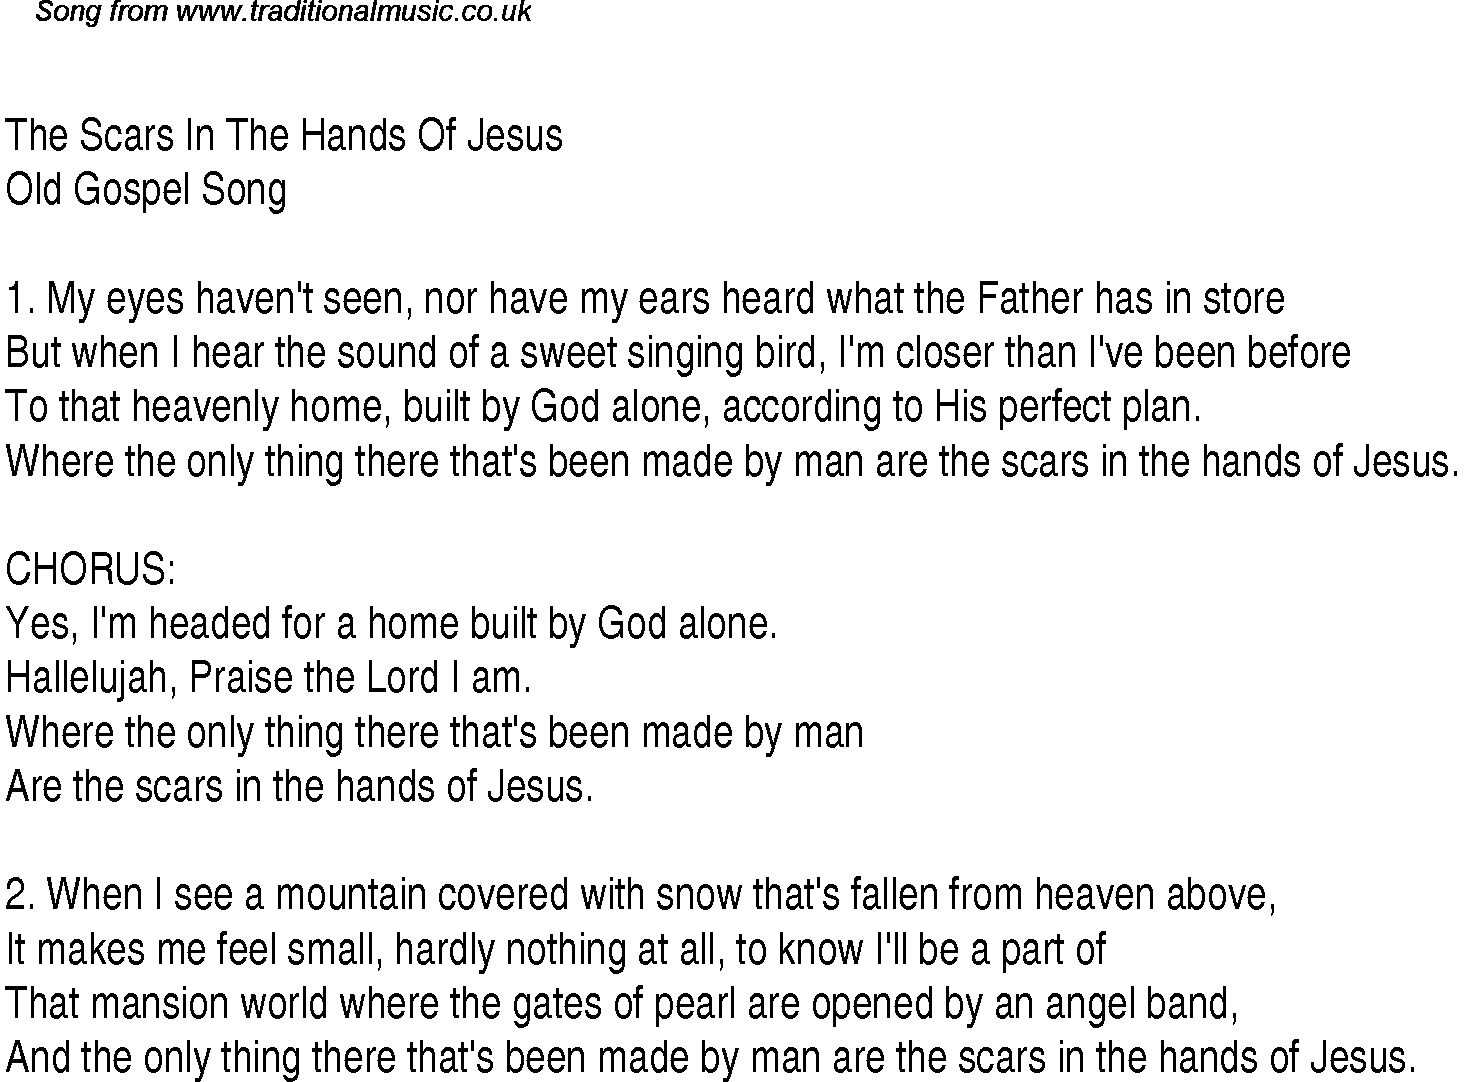 Gospel Song: the-scars-in-the-hands-of-jesus, lyrics and chords.